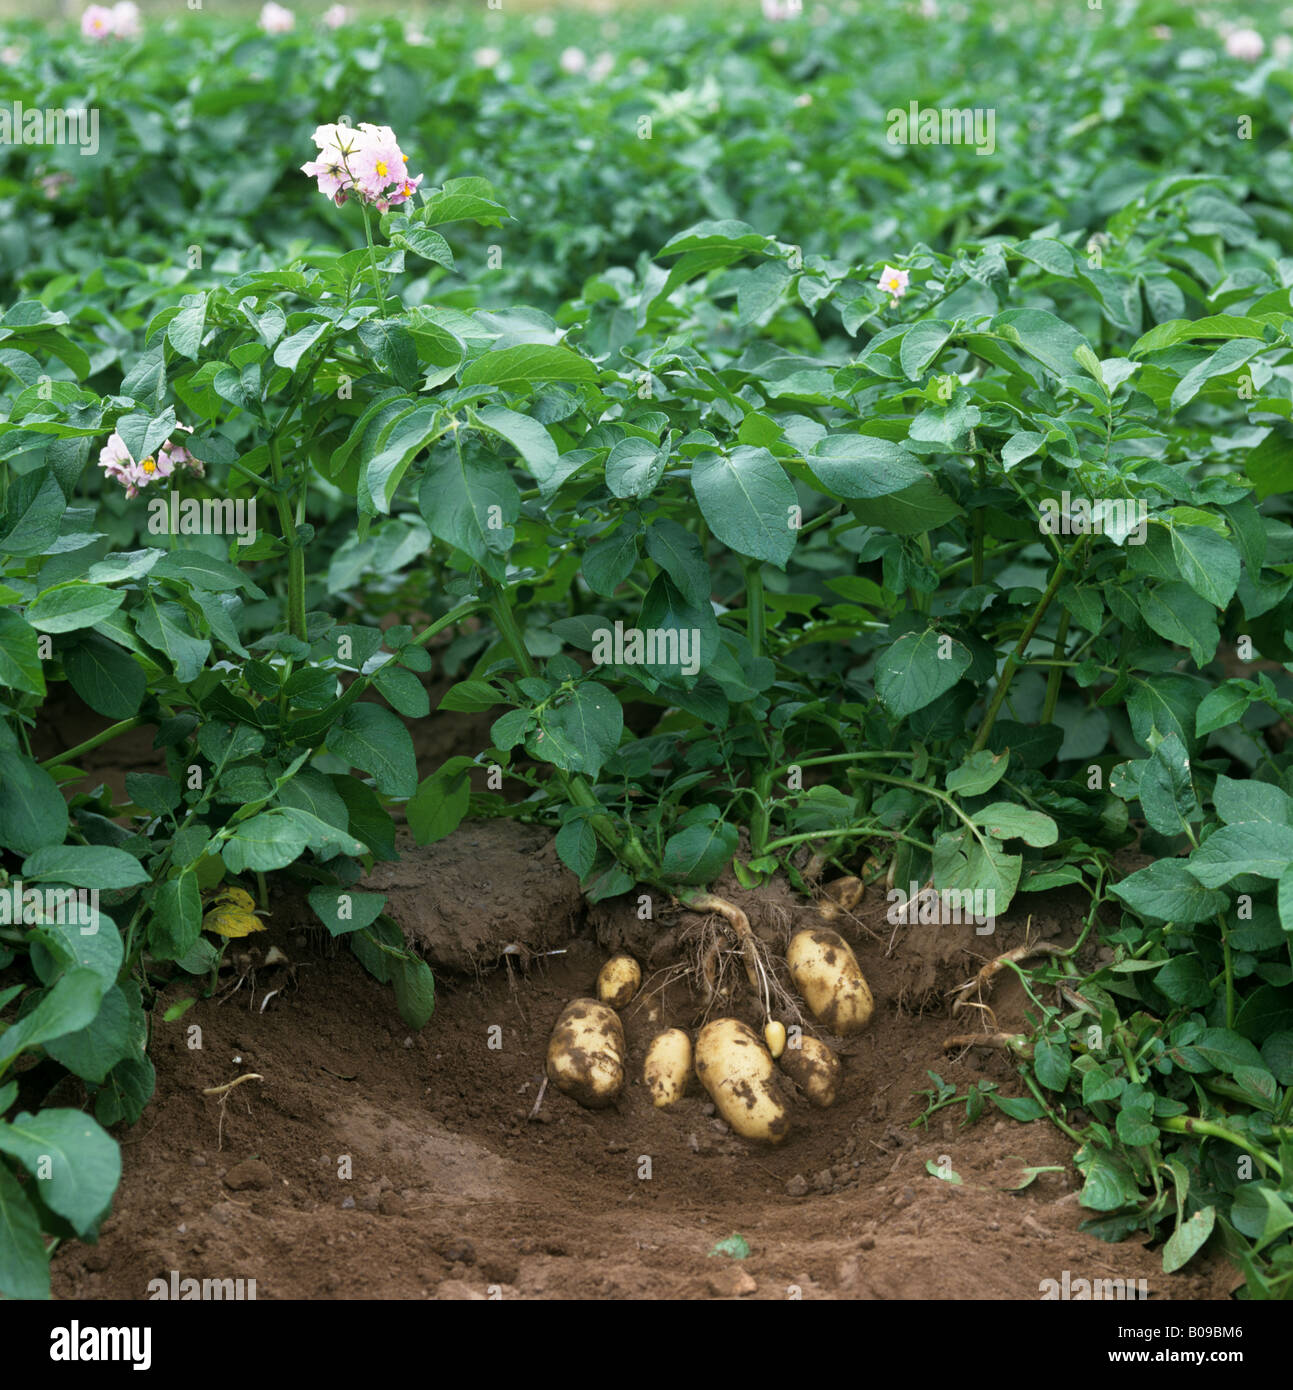 Exposed mature potato tubers and plants variety Charlotte Stock Photo